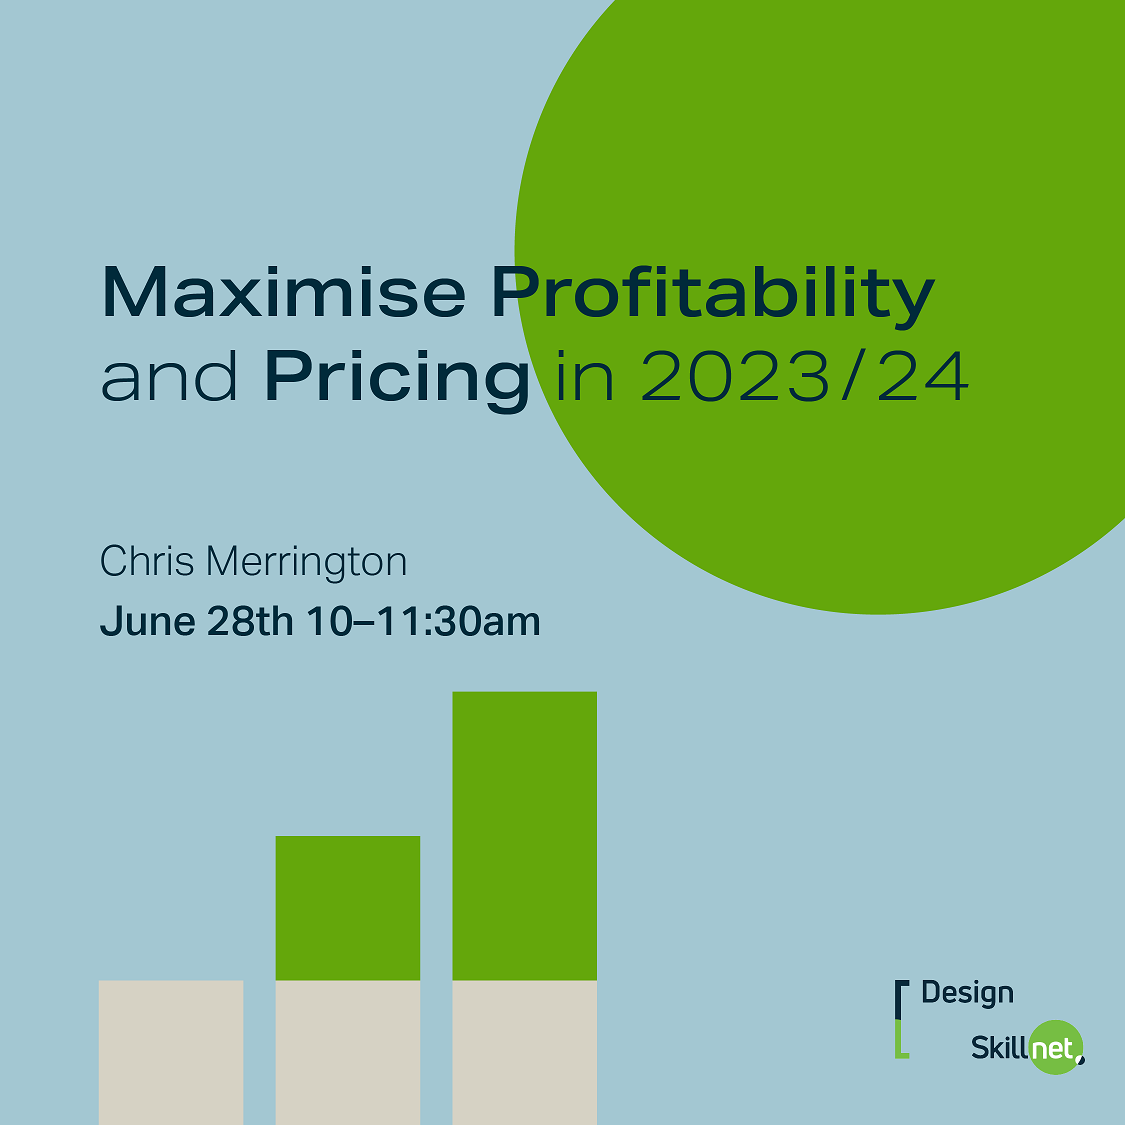 Maximise Profitability and Pricing in 2023